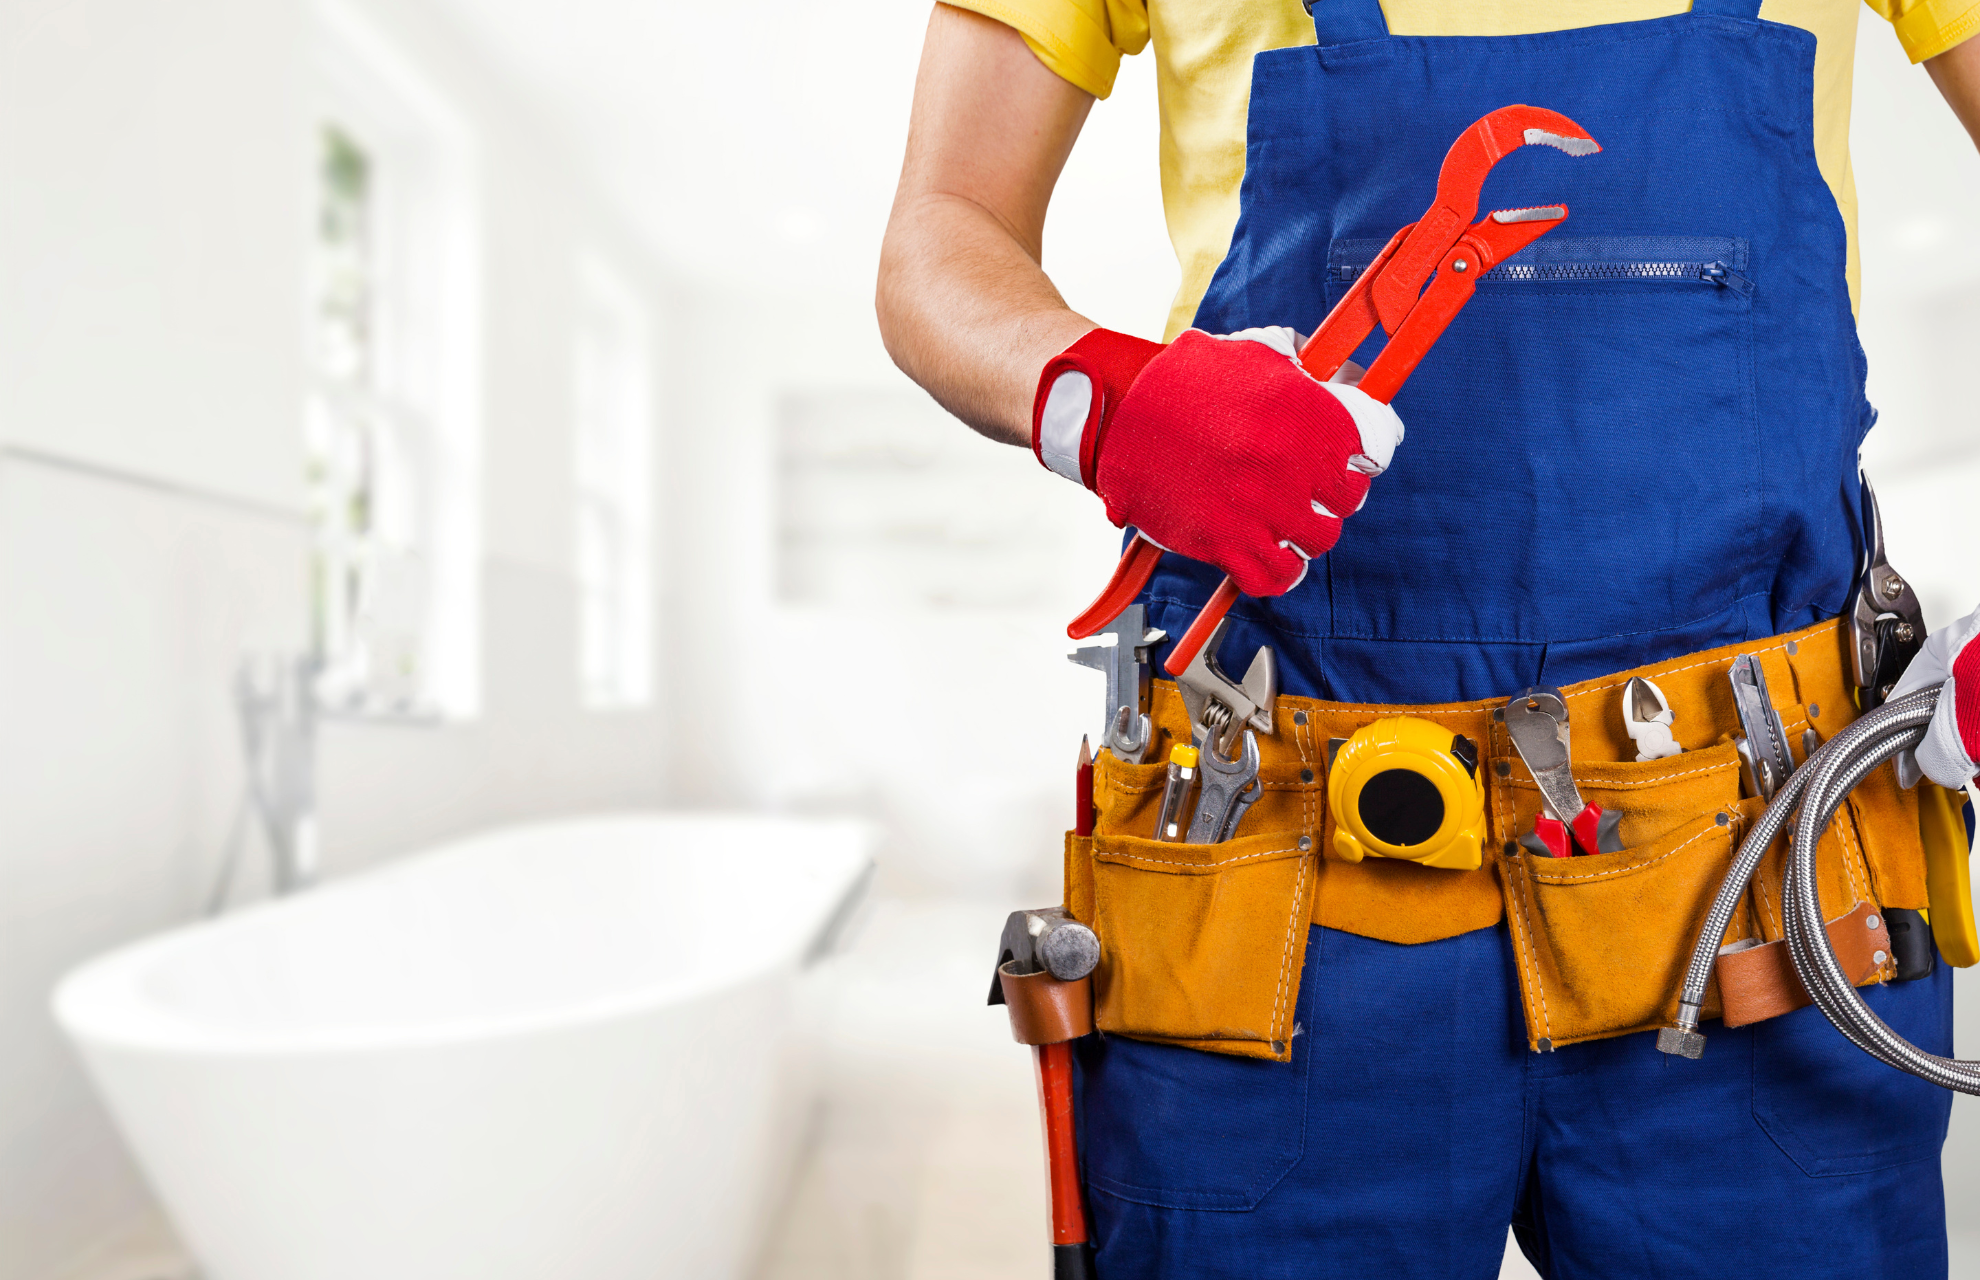 Plumber wearing a tool belt and holding a tool